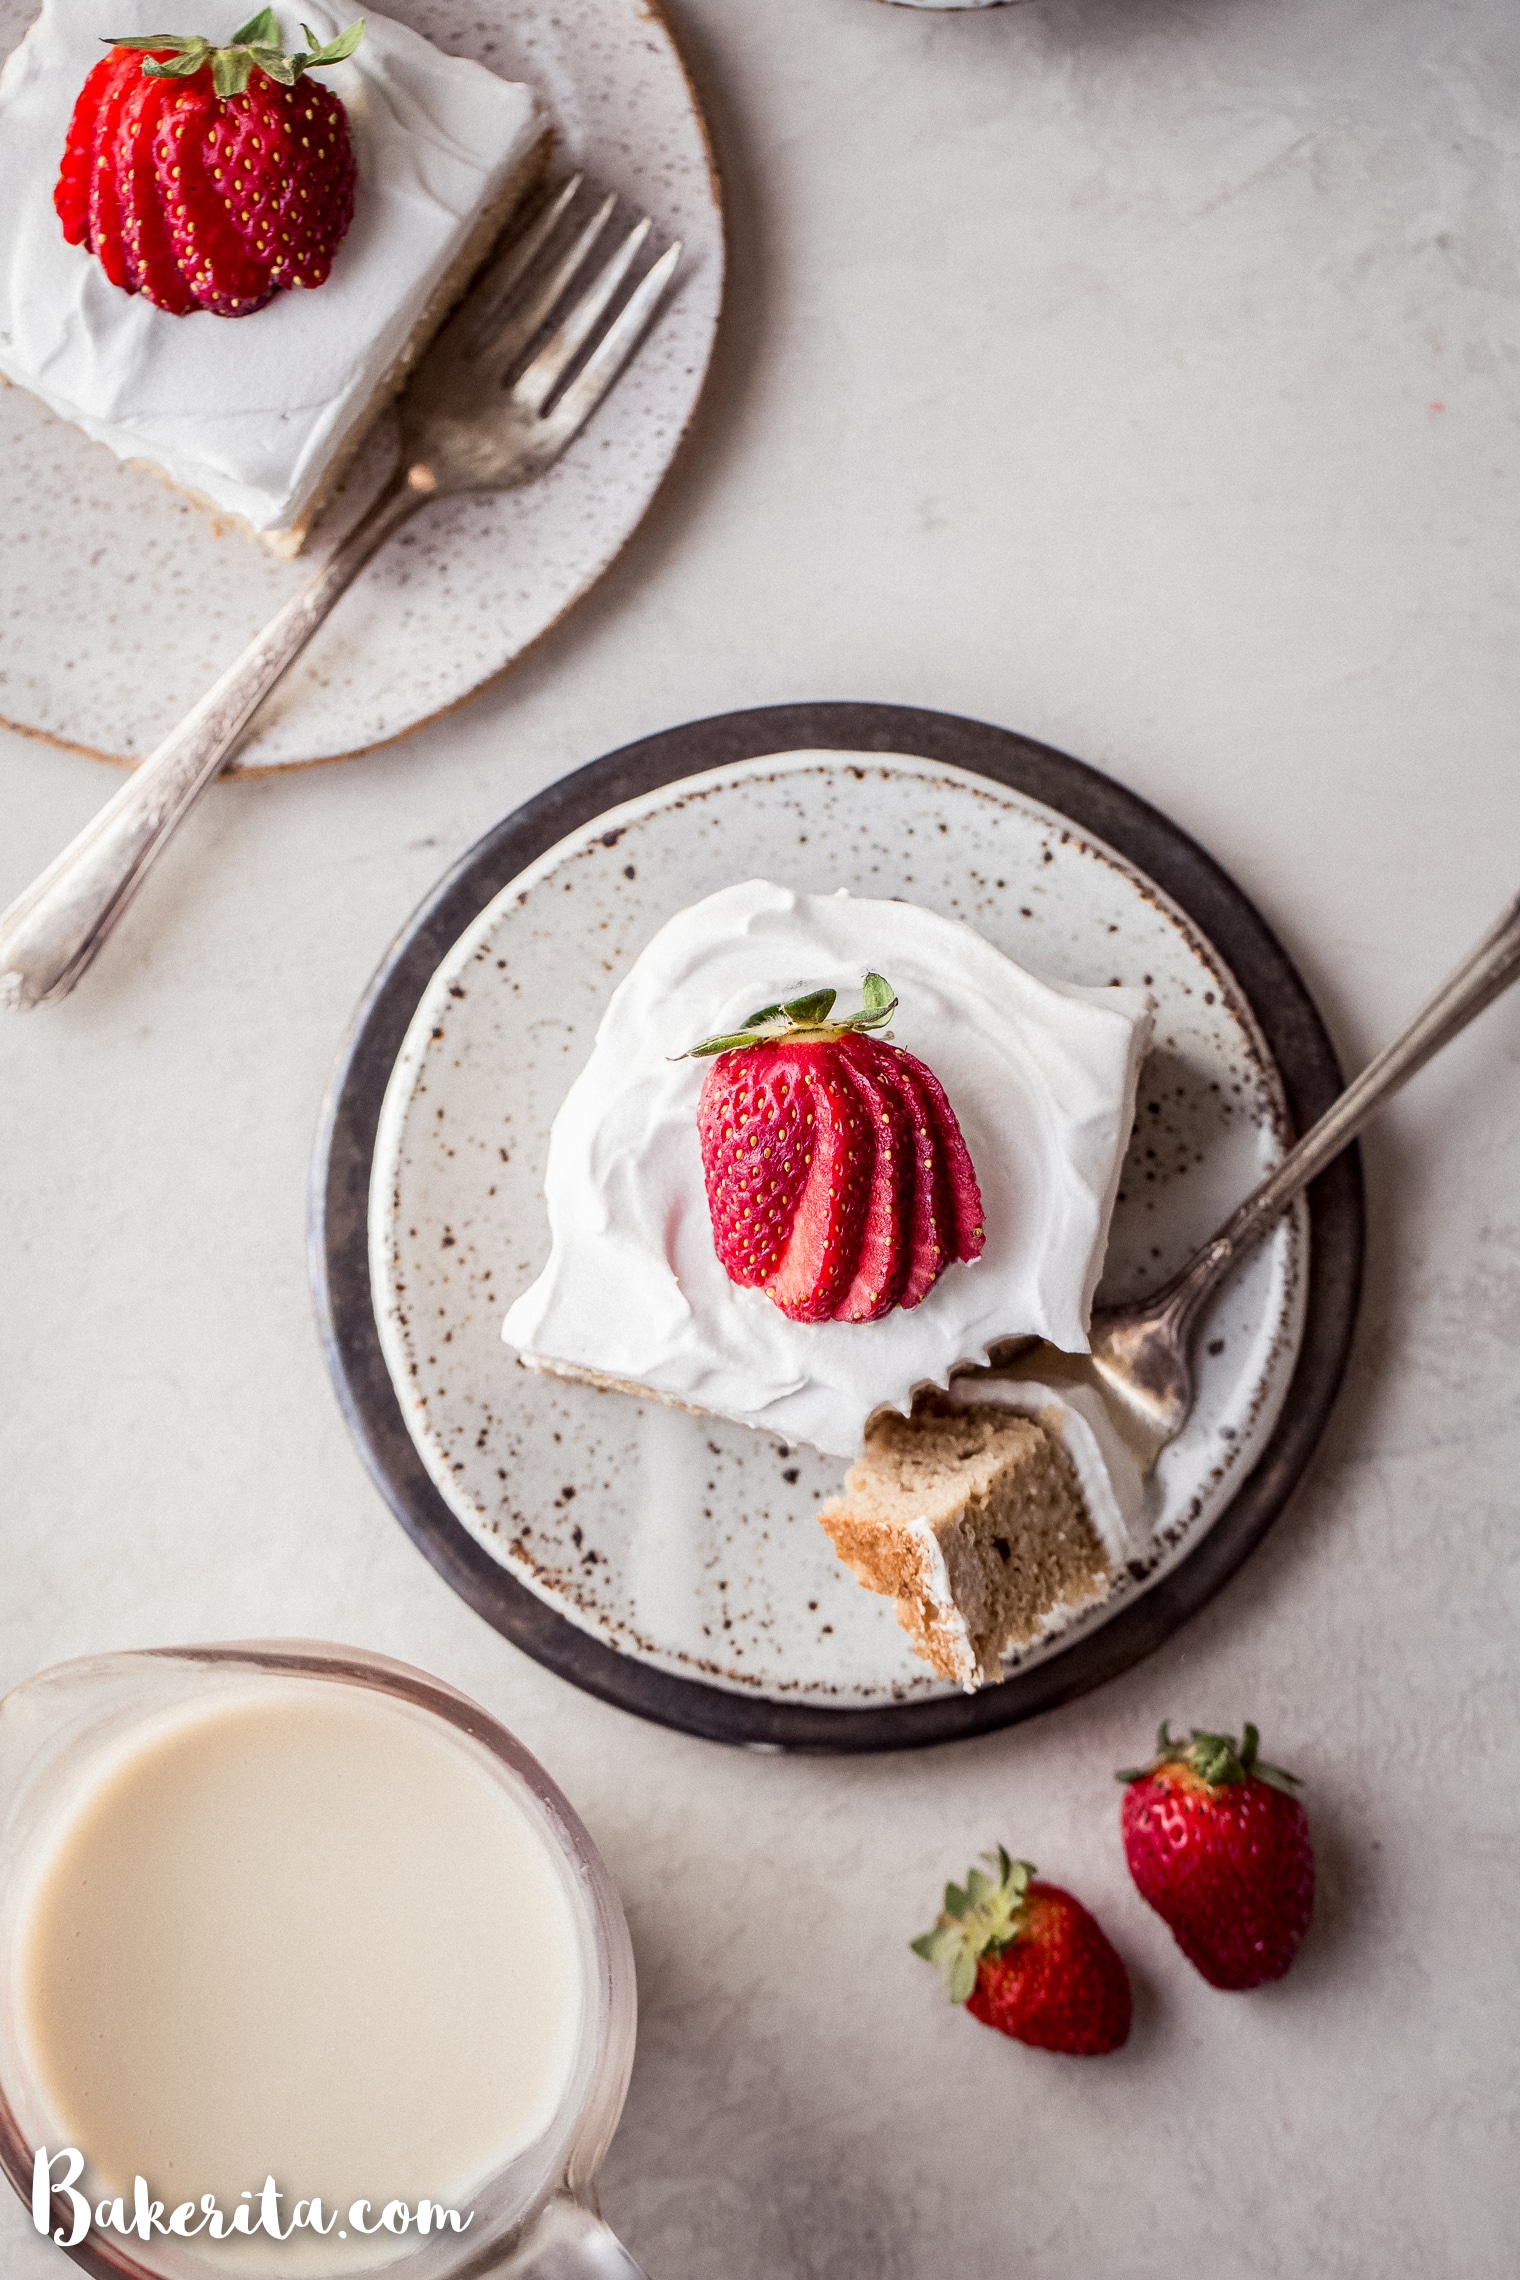 This Gluten-Free Tres Leches Cake is soaked with evaporated coconut milk & sweetened condensed coconut milk to make a dairy-free version of this classic Latin American dessert. The paleo vanilla sponge cake is deliciously moist and topped with whipped coconut cream. It is dairy-free with a vegan option.